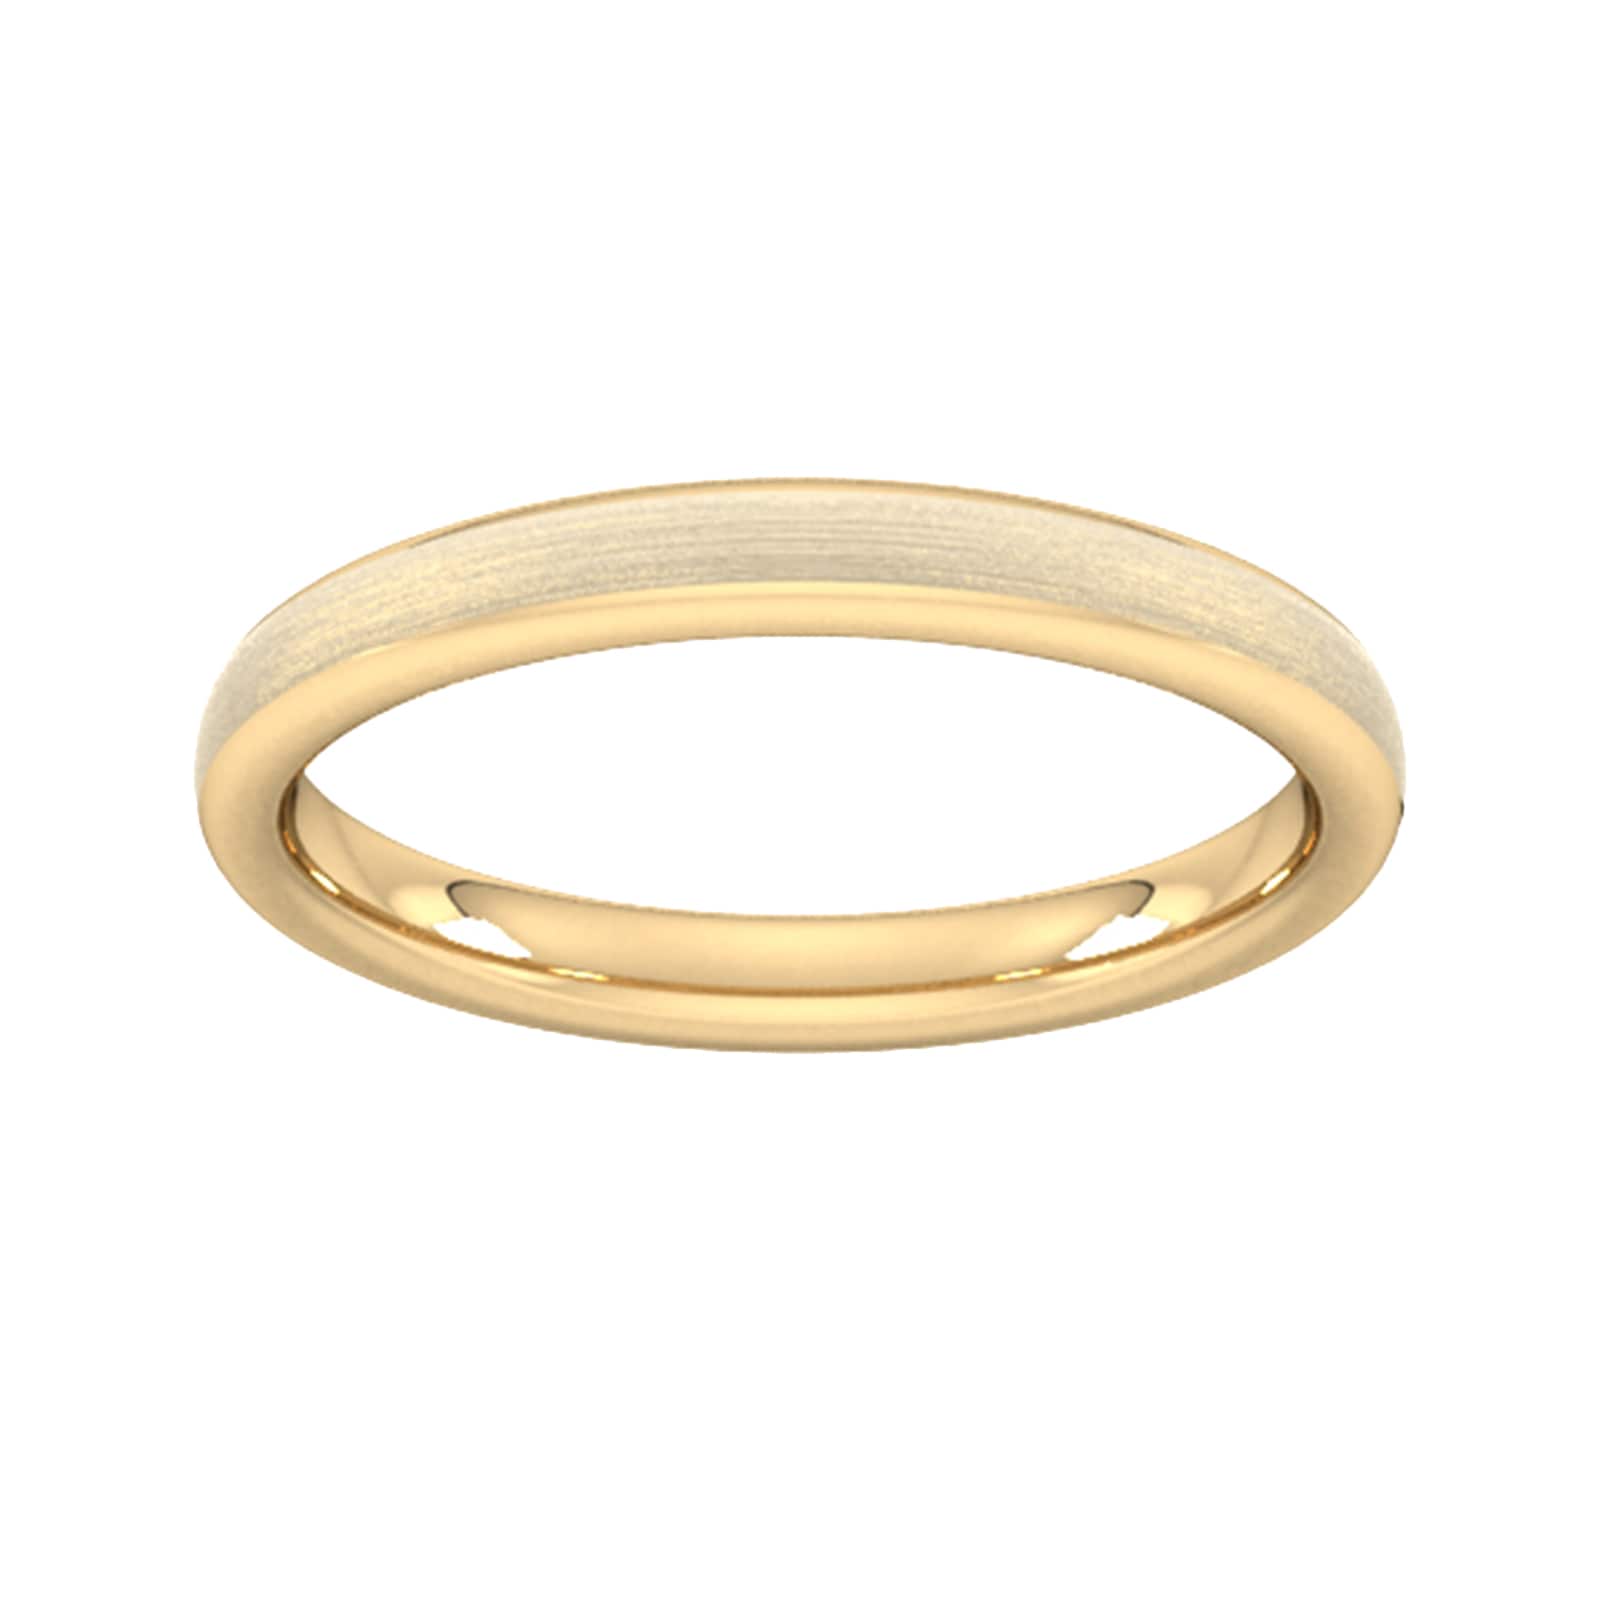 2.5mm Traditional Court Heavy Matt Finished Wedding Ring In 18 Carat Yellow Gold - Ring Size U